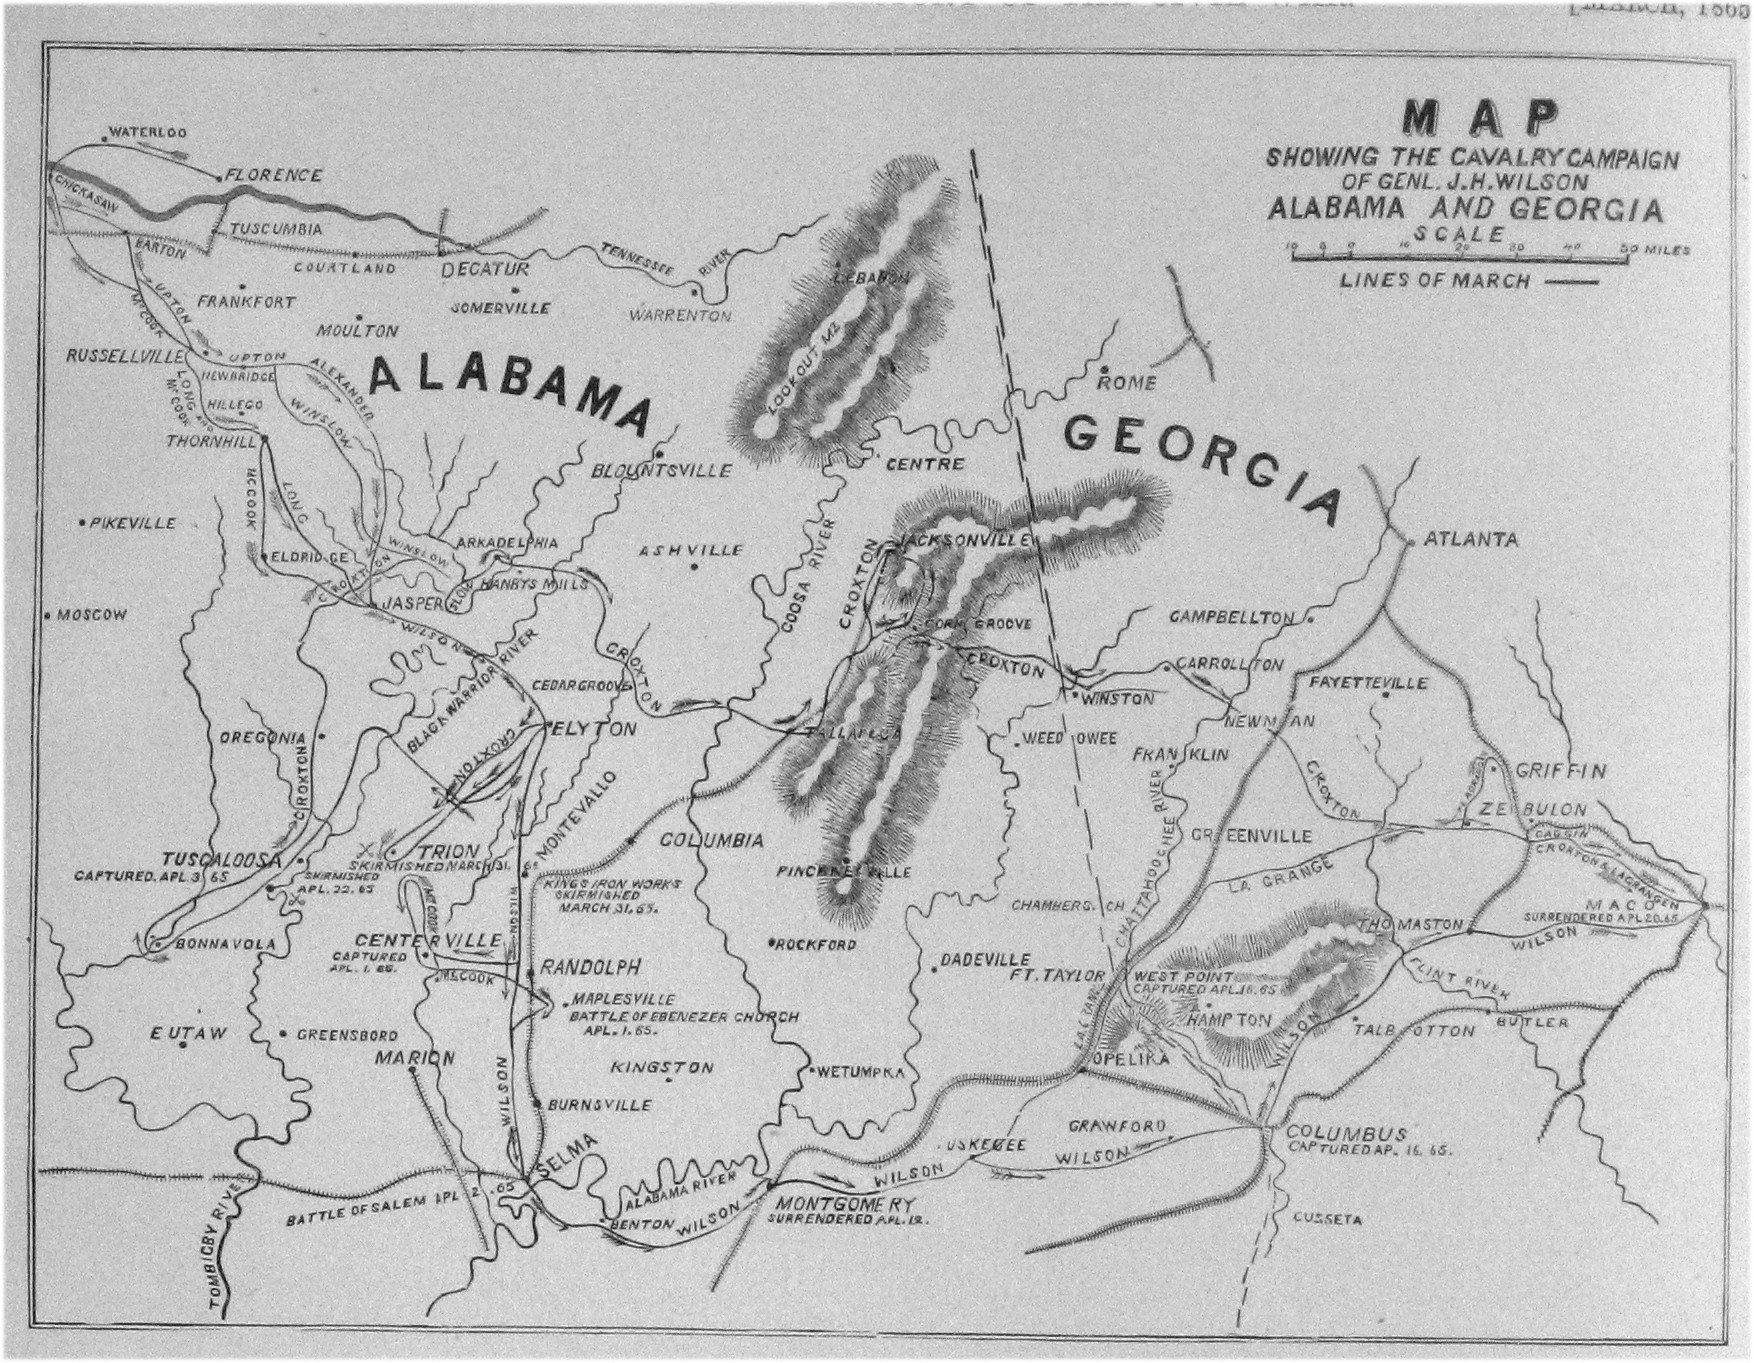 j h wilson cavalry campaign map